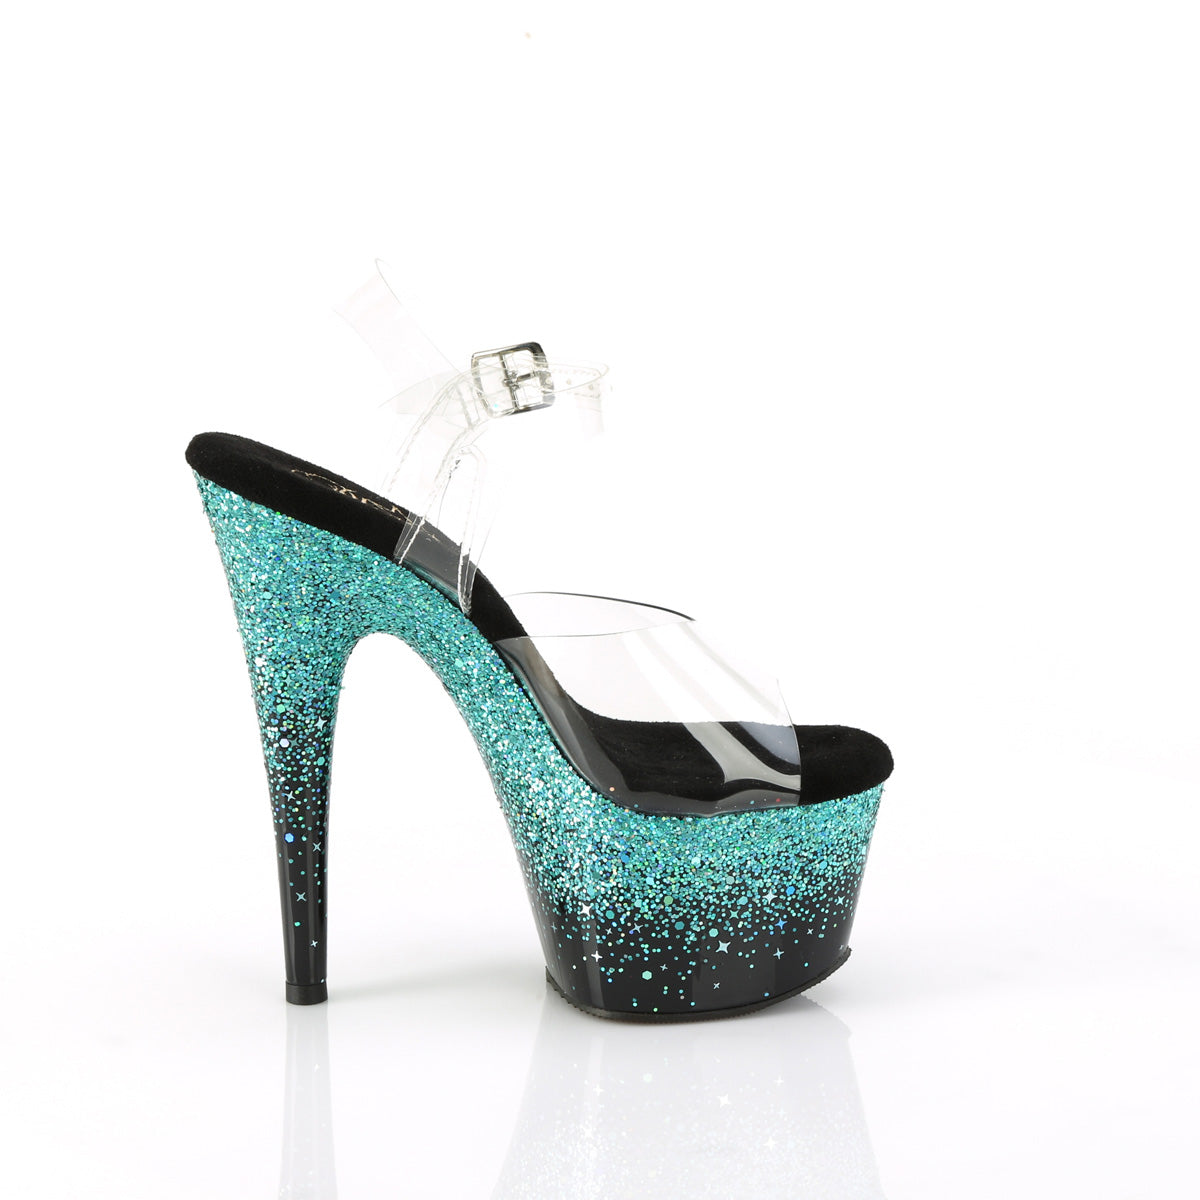 7 Inch Heel ADORE-708SS Clear Turquoise Glitter